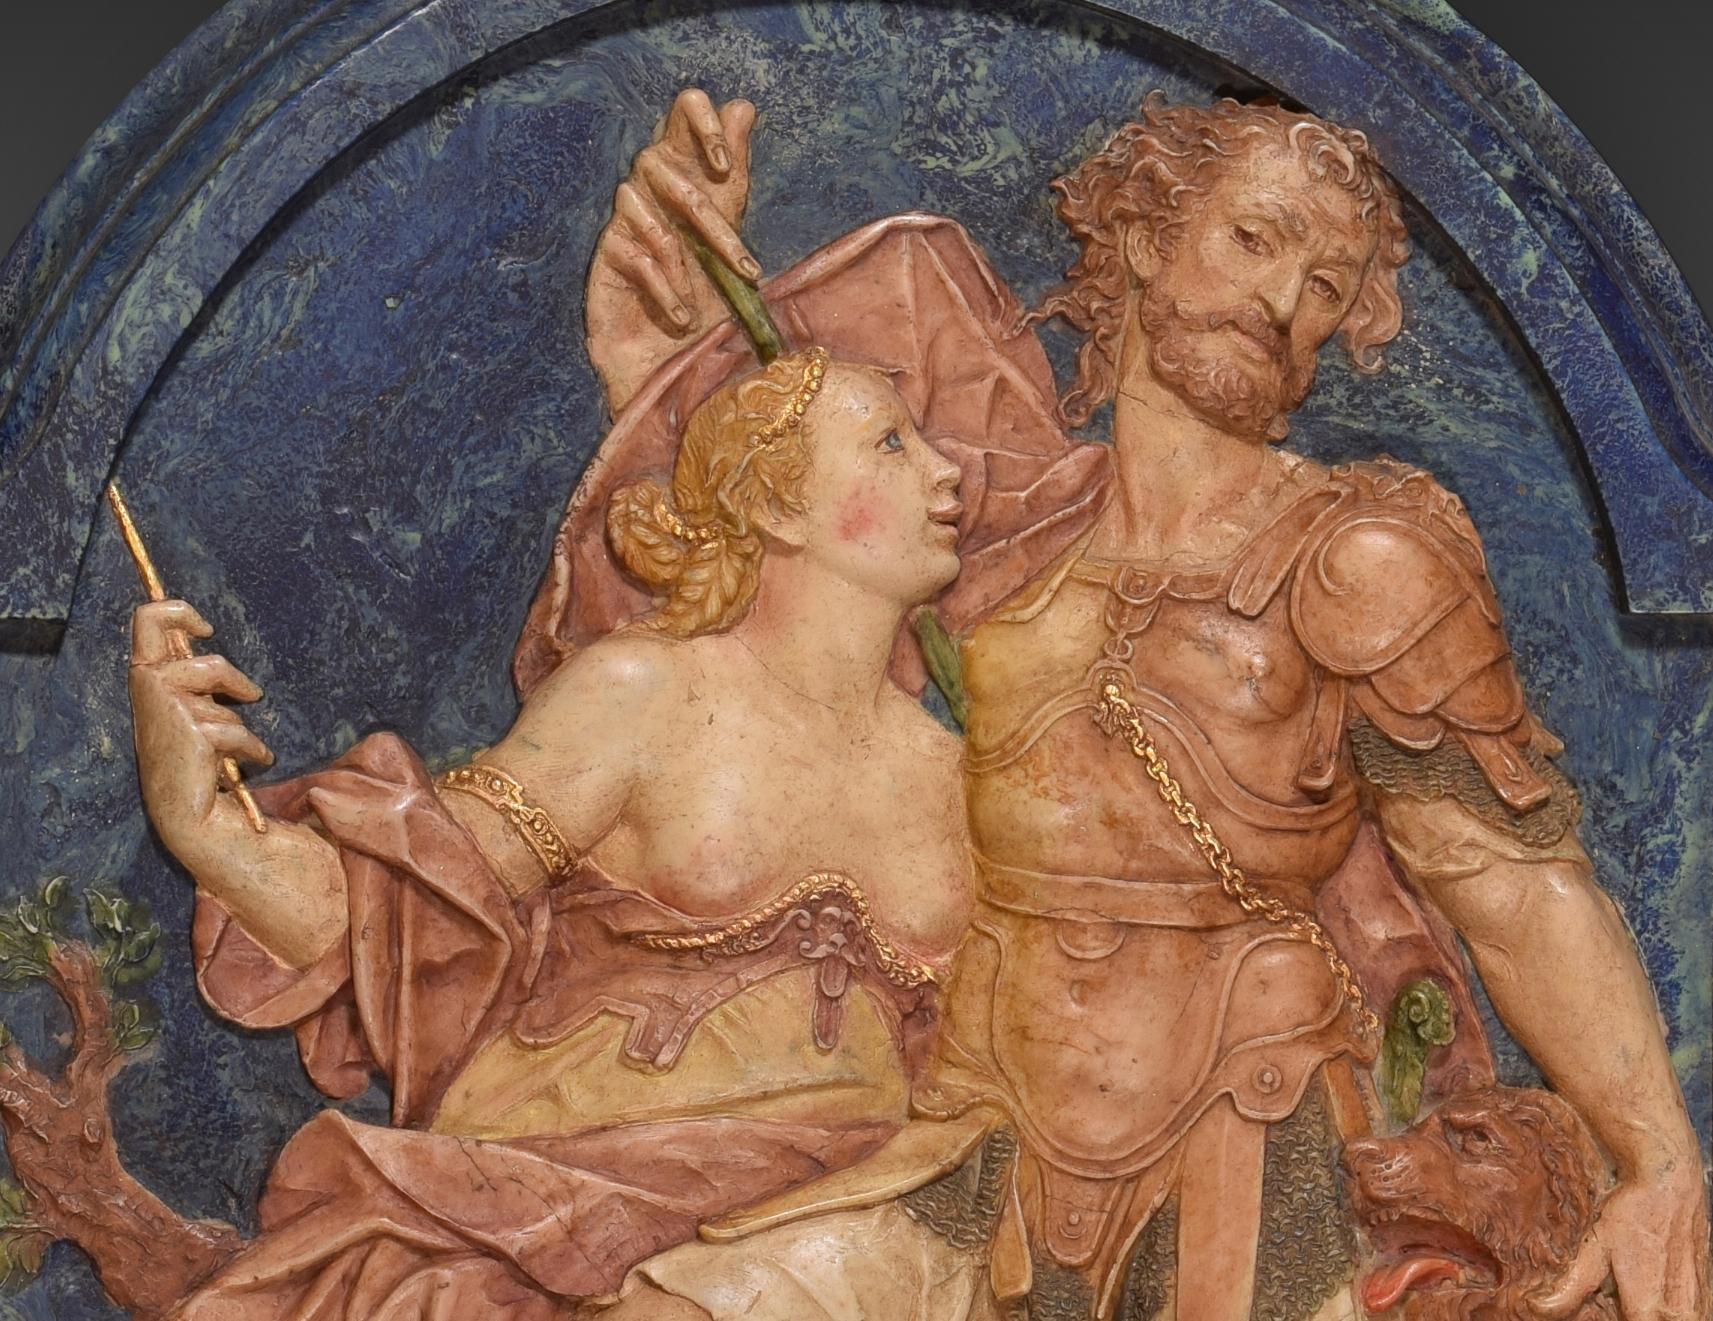 Odysseus and Circe, relief. Modeled alabaster. 20th century, following the model of SPRANGER, Bartholomäus (1546-1611). 
Panel with figurative relief and a fine frame around it made of alabaster molded with polychrome that presents a mythological